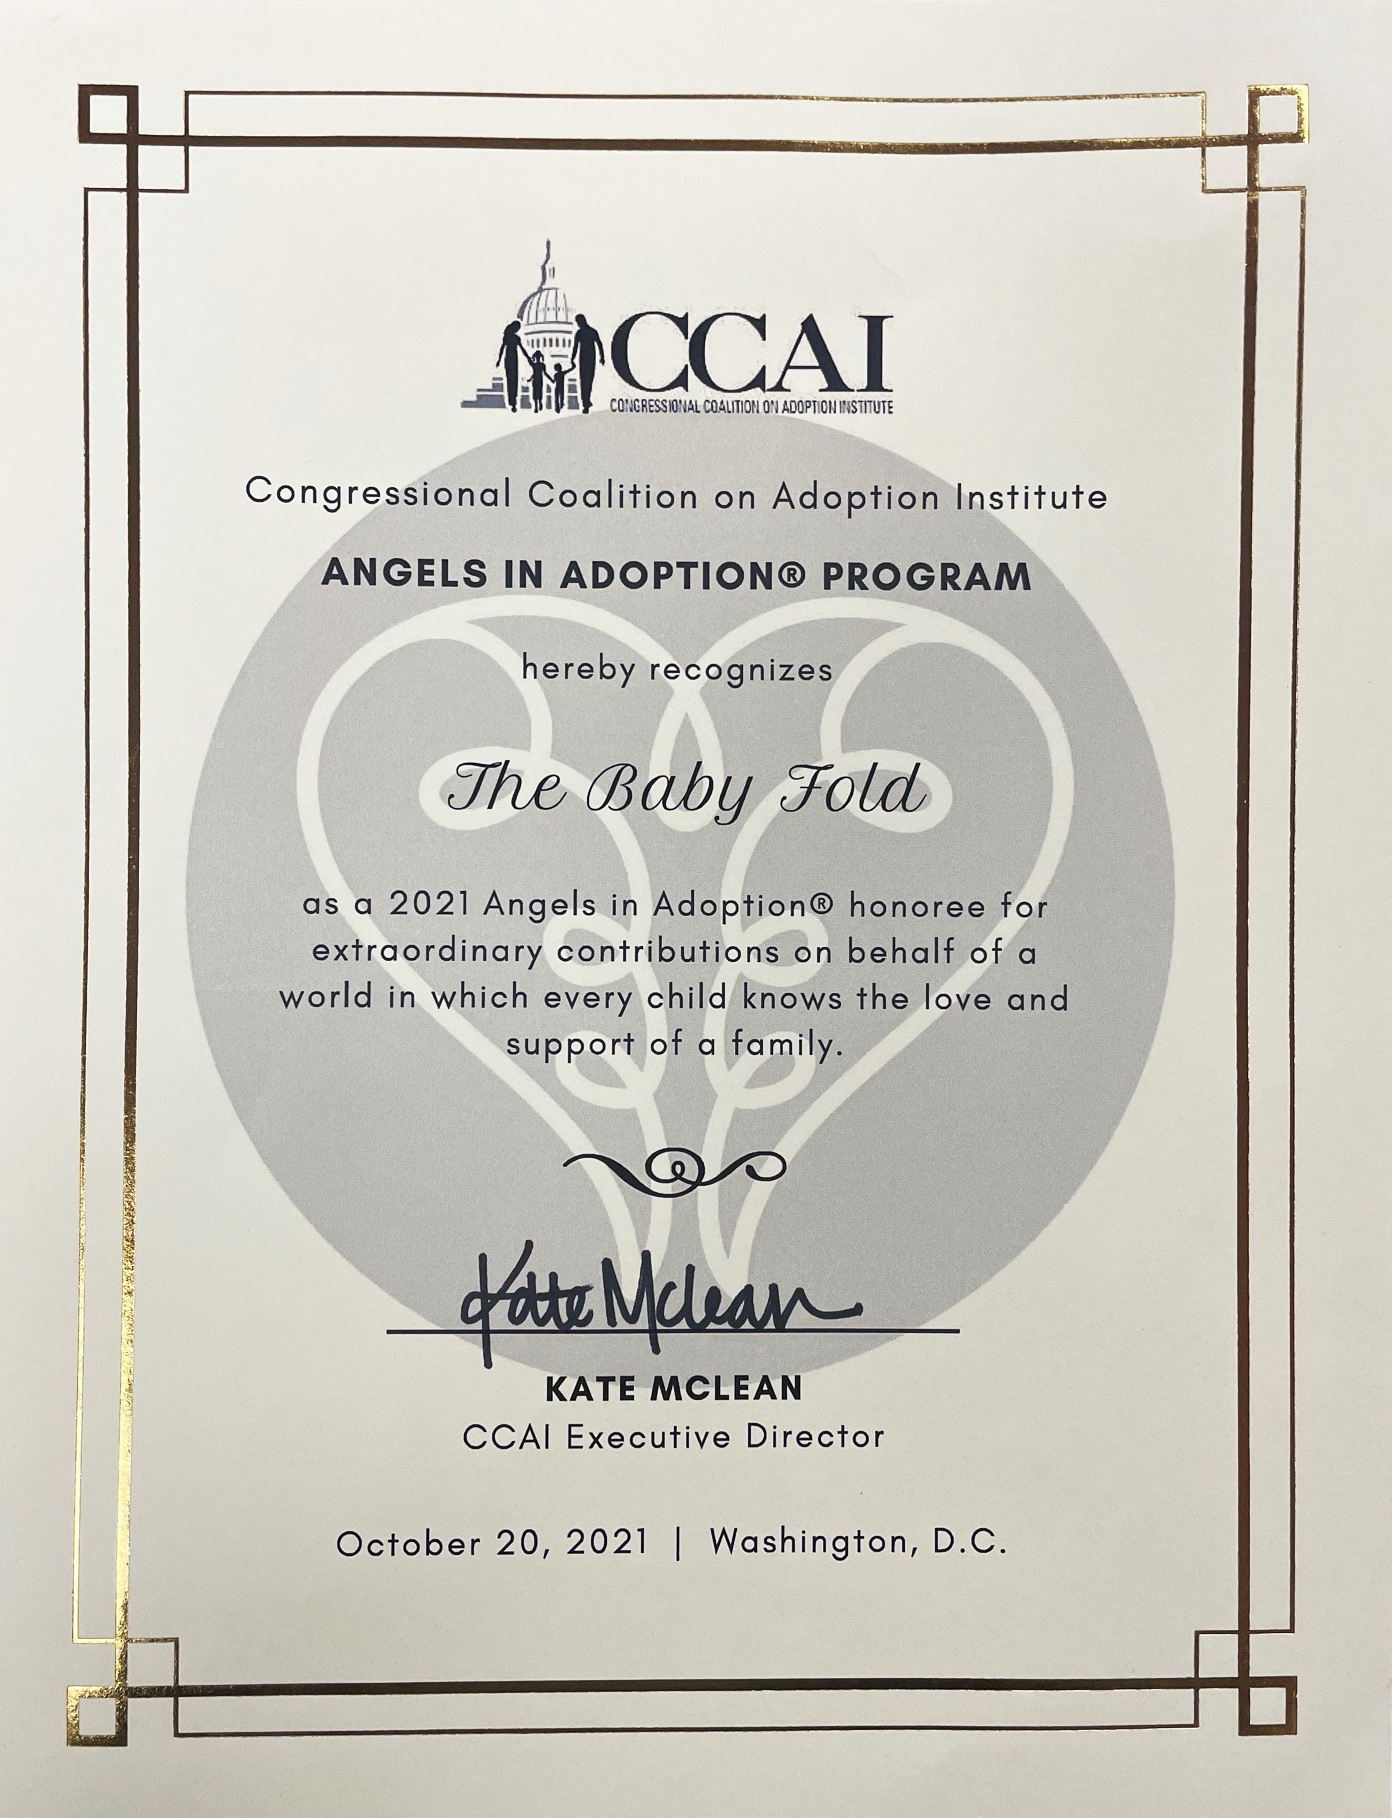 The award given to The Baby Fold for being an Angel of Adoption